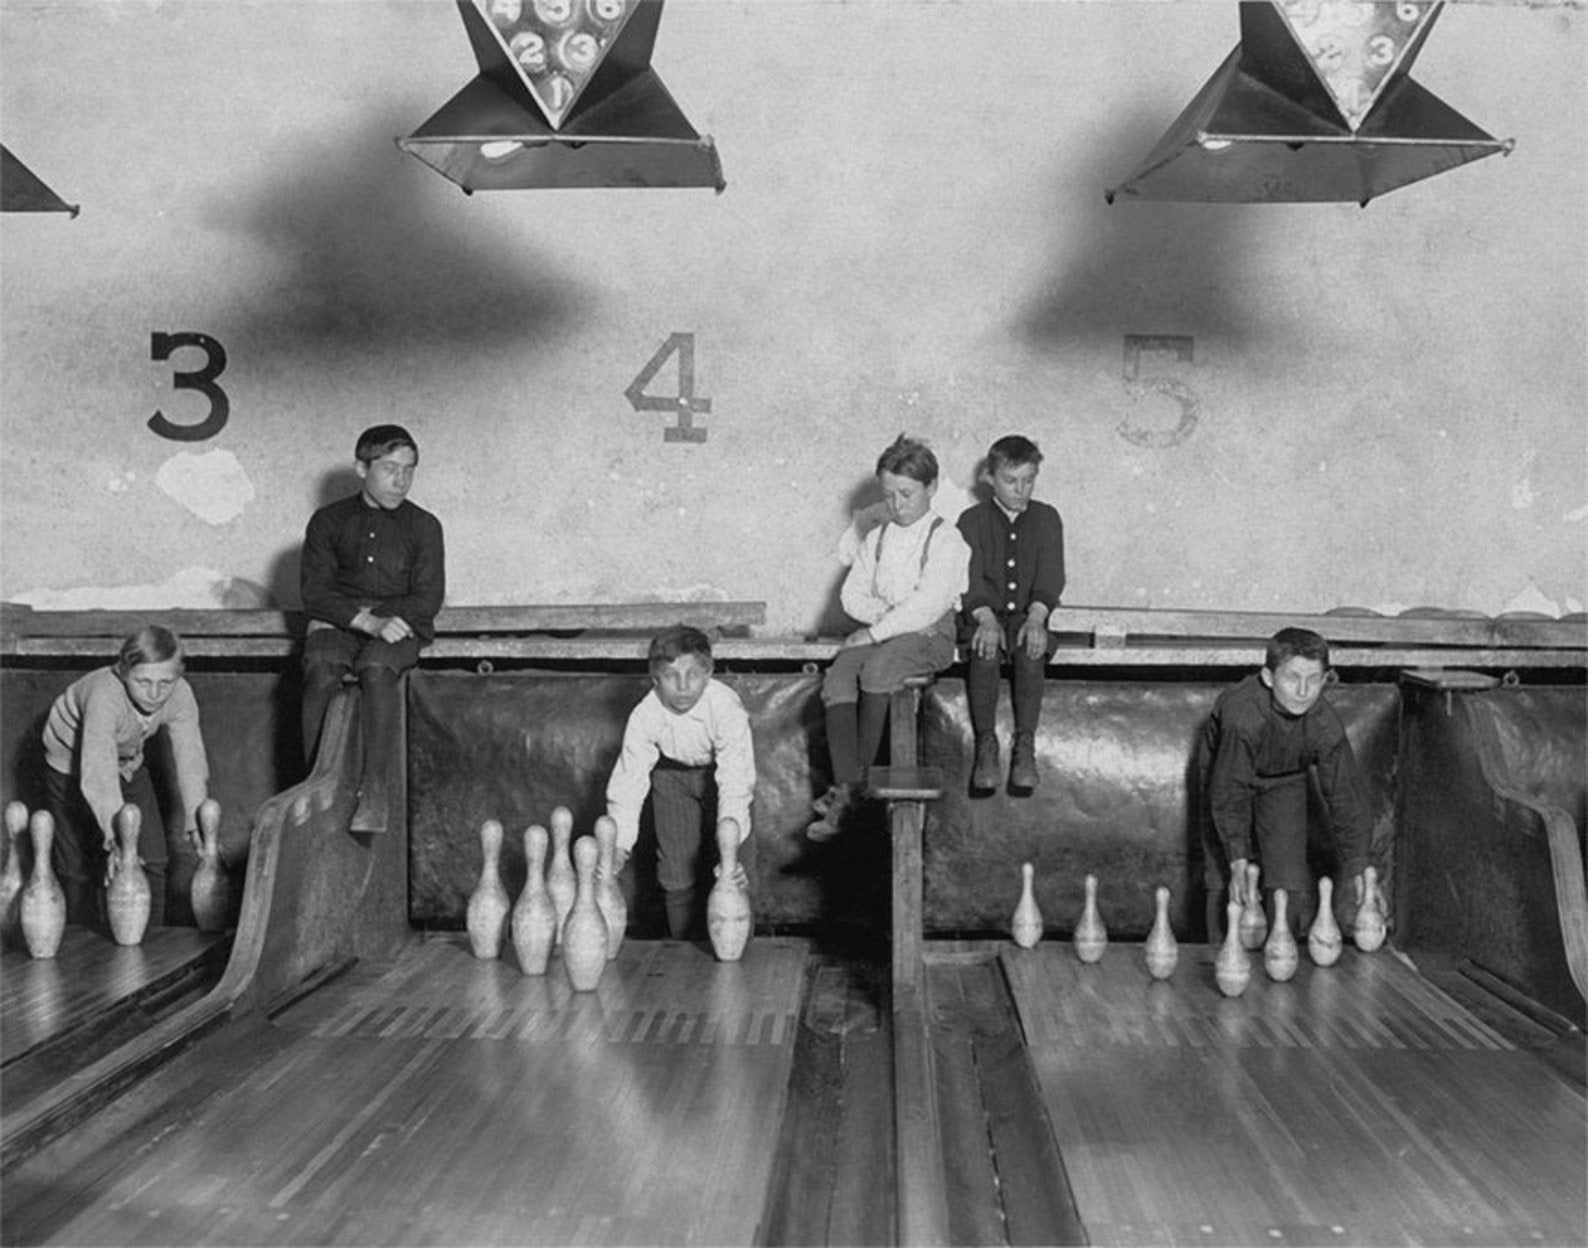 Boys Setting Bowling Pins, Lewis Hine Photographer, 1940s Historical Pix